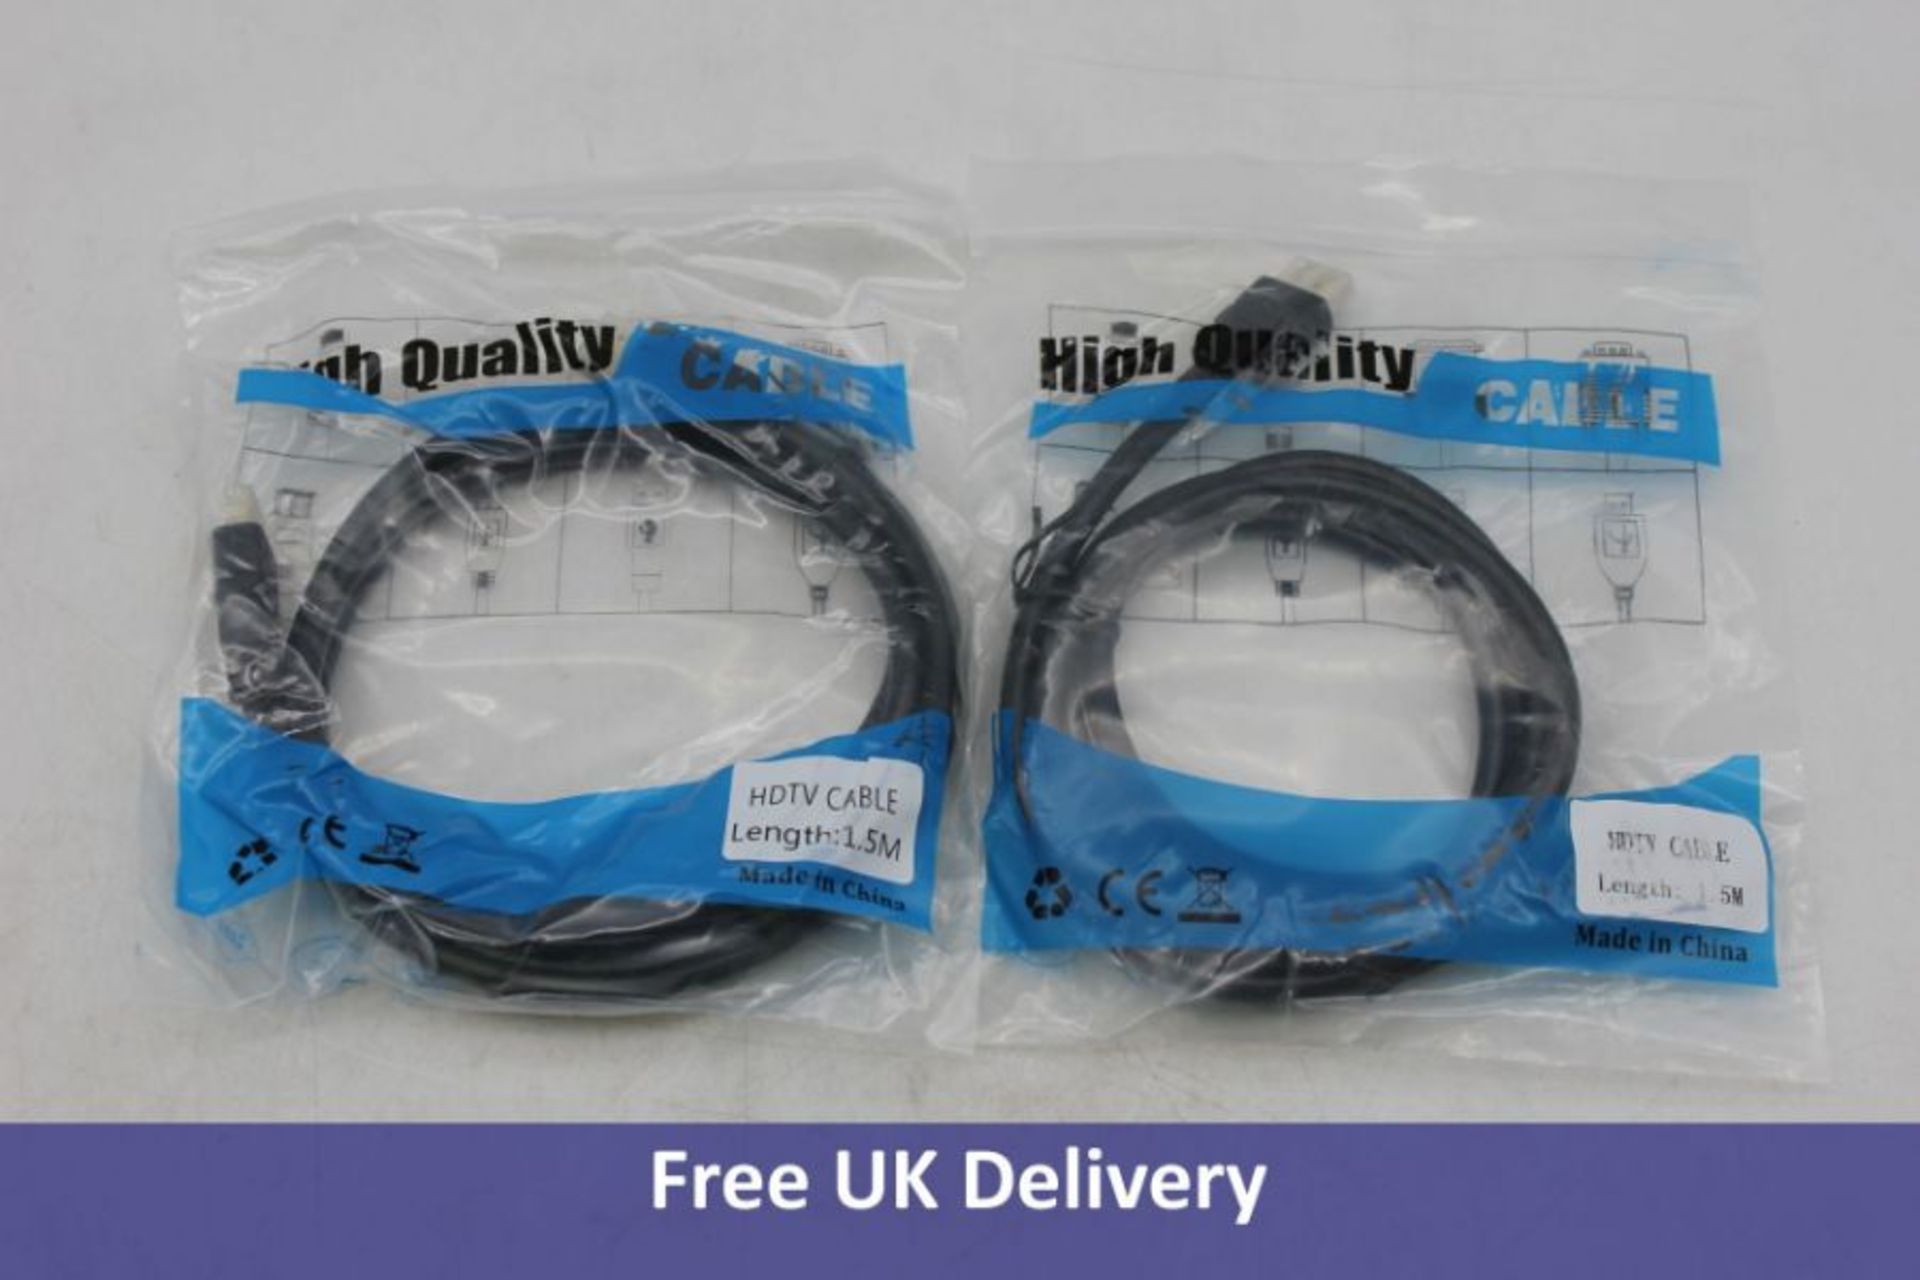 One hundred HDTV Cables, Length 1.5M